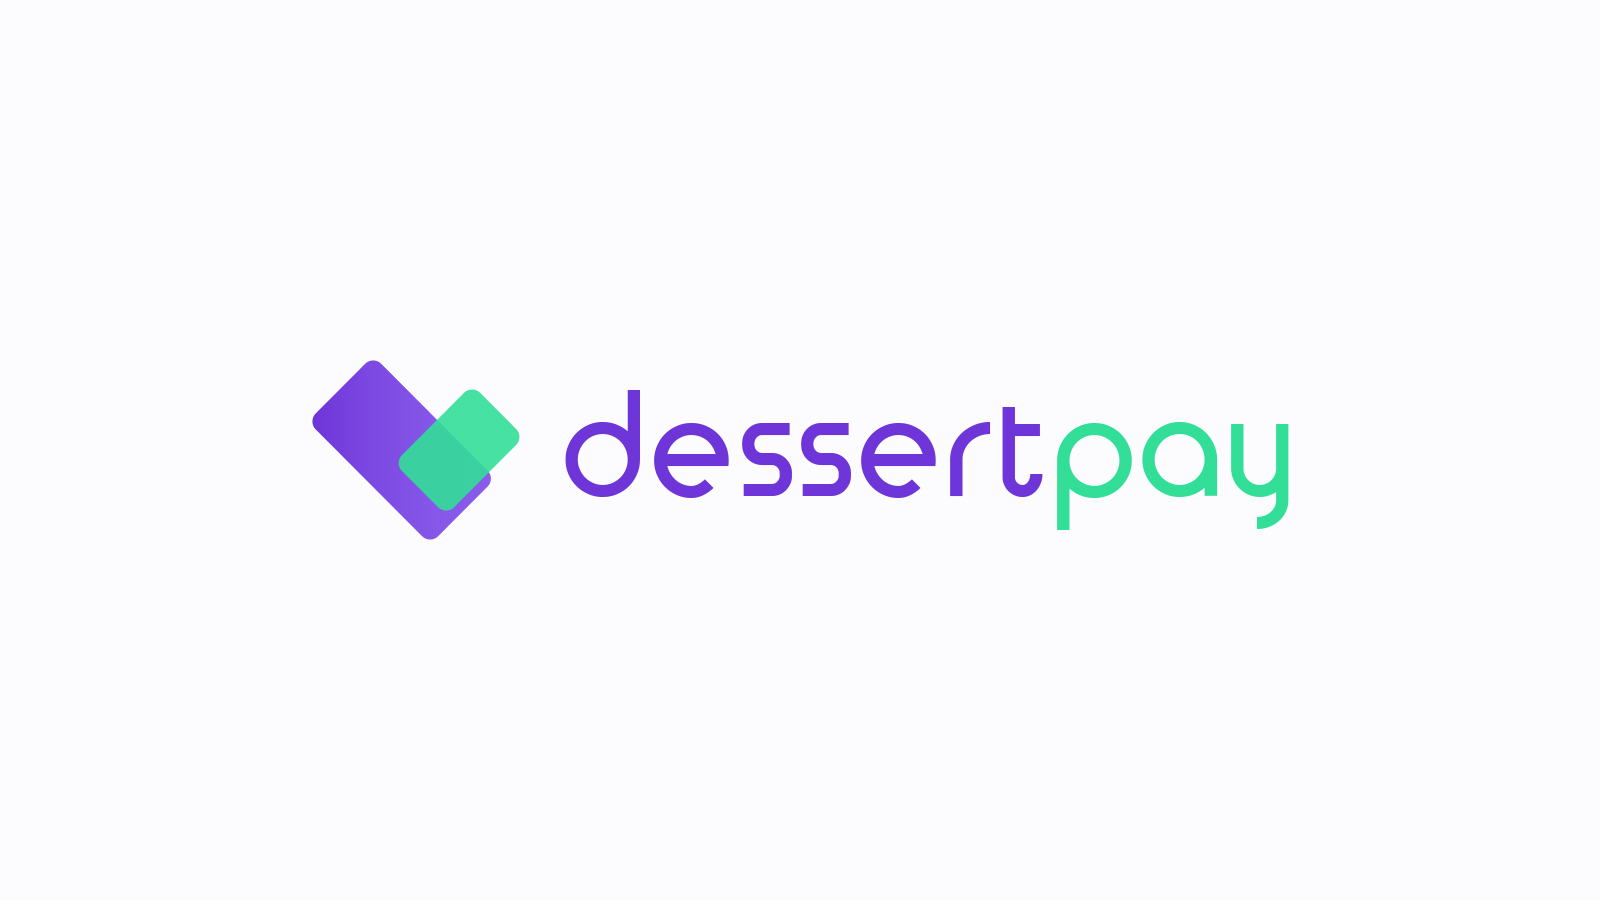 dessert-pay-accept-payments-with-your-phone